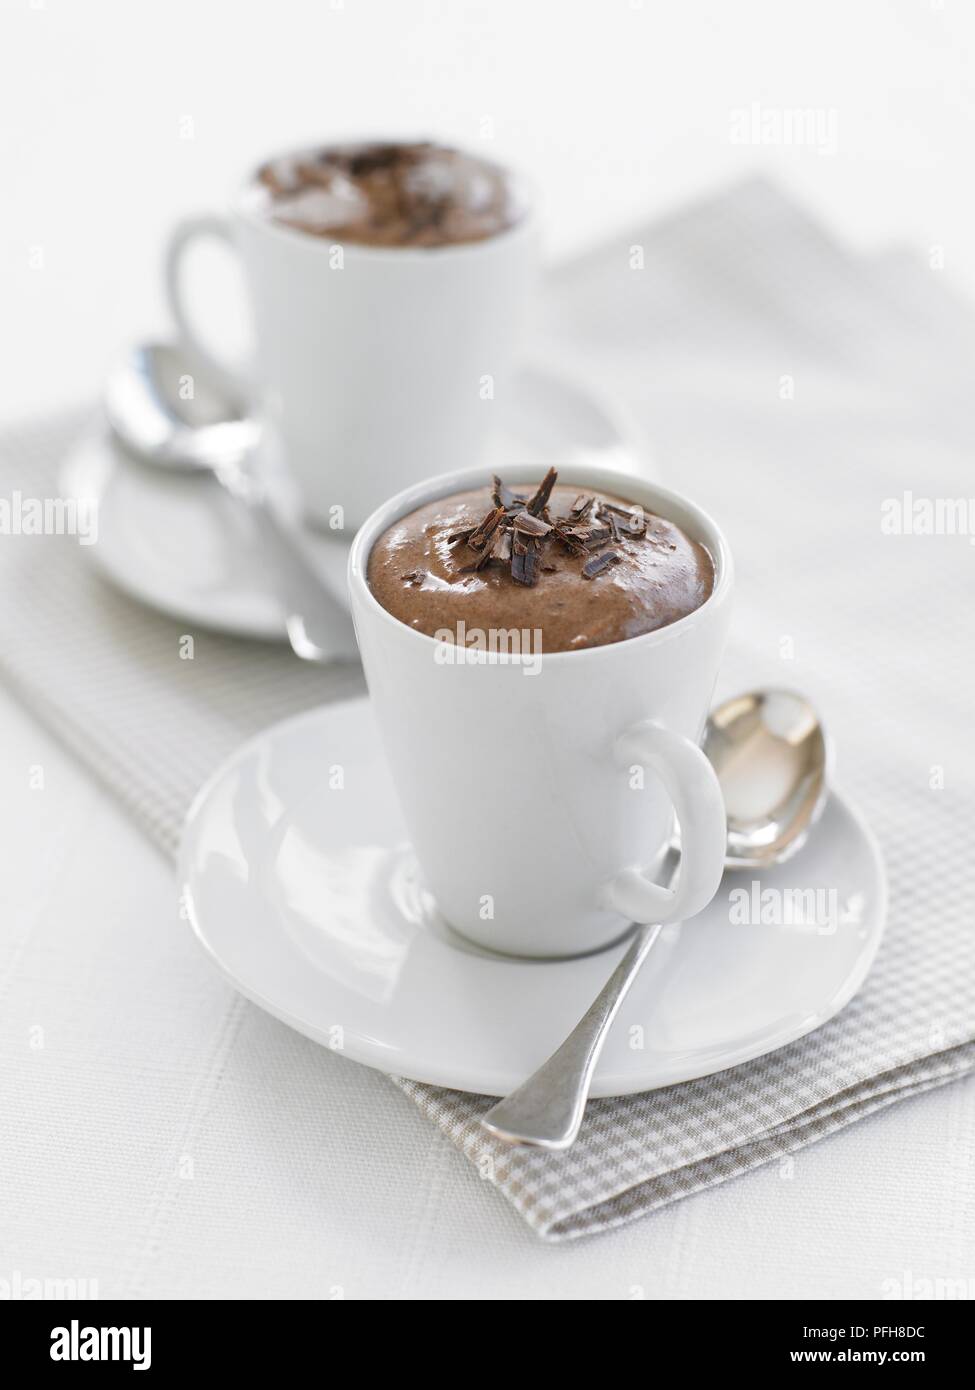 Two portions of chocolate mousse, served in mugs, with spoons, close-up Stock Photo